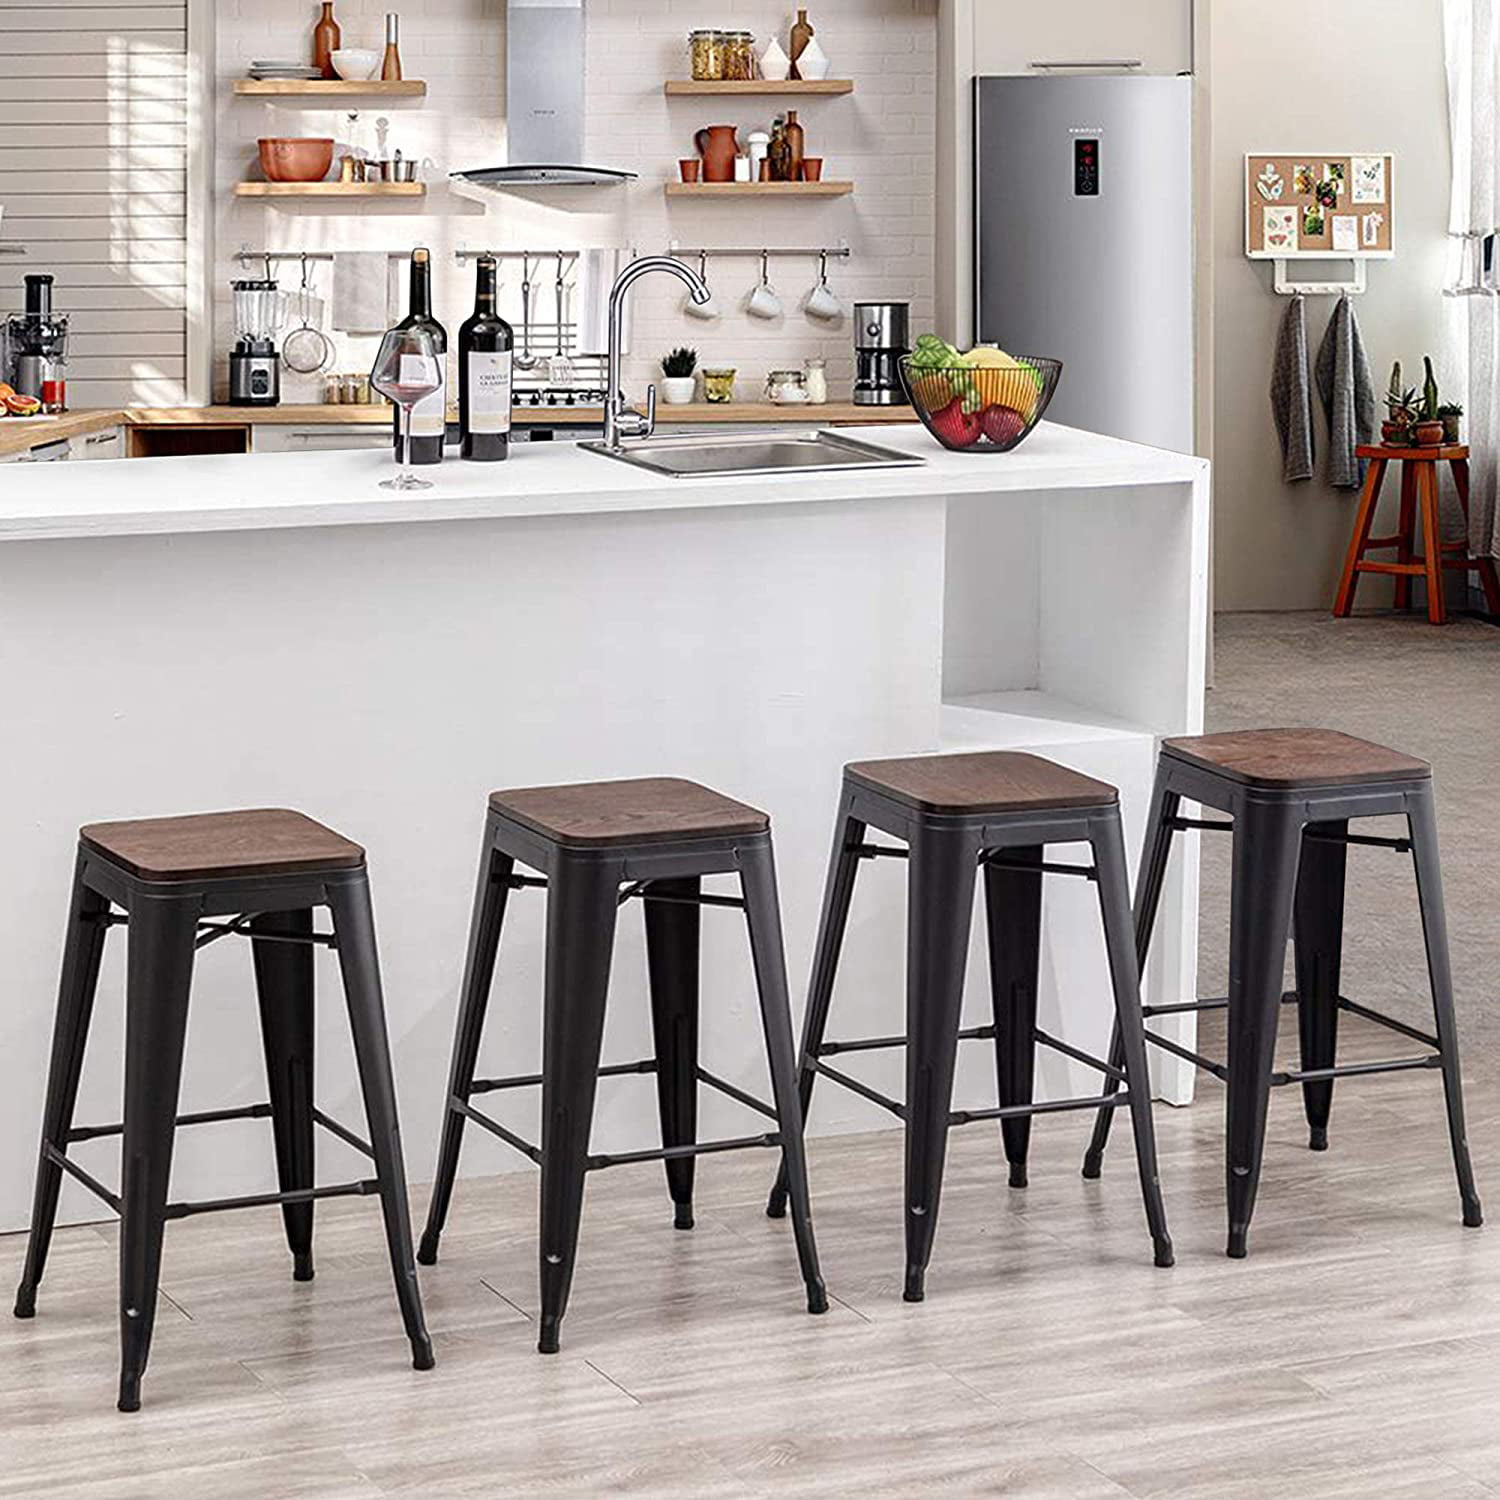 Tolix Industrial Breakfast Bar Stool Table Set w/4X Metal Kitchen Counter Chairs 